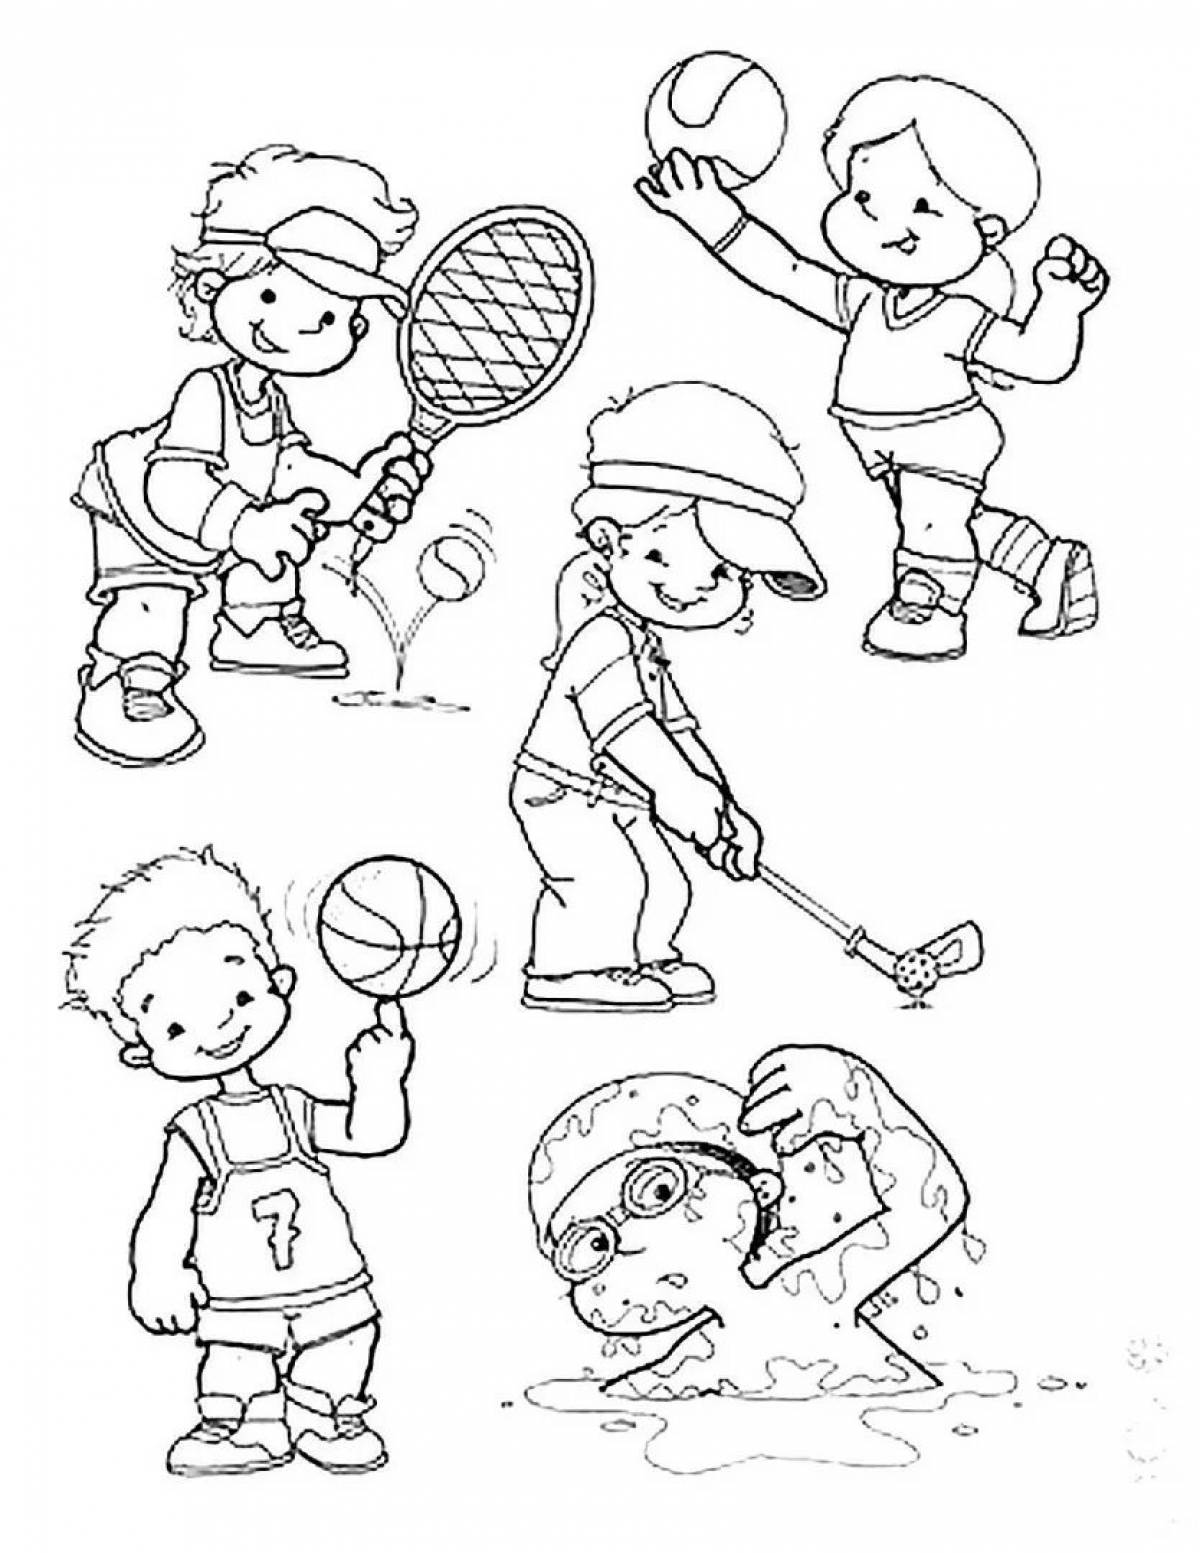 Royal health and sports coloring book